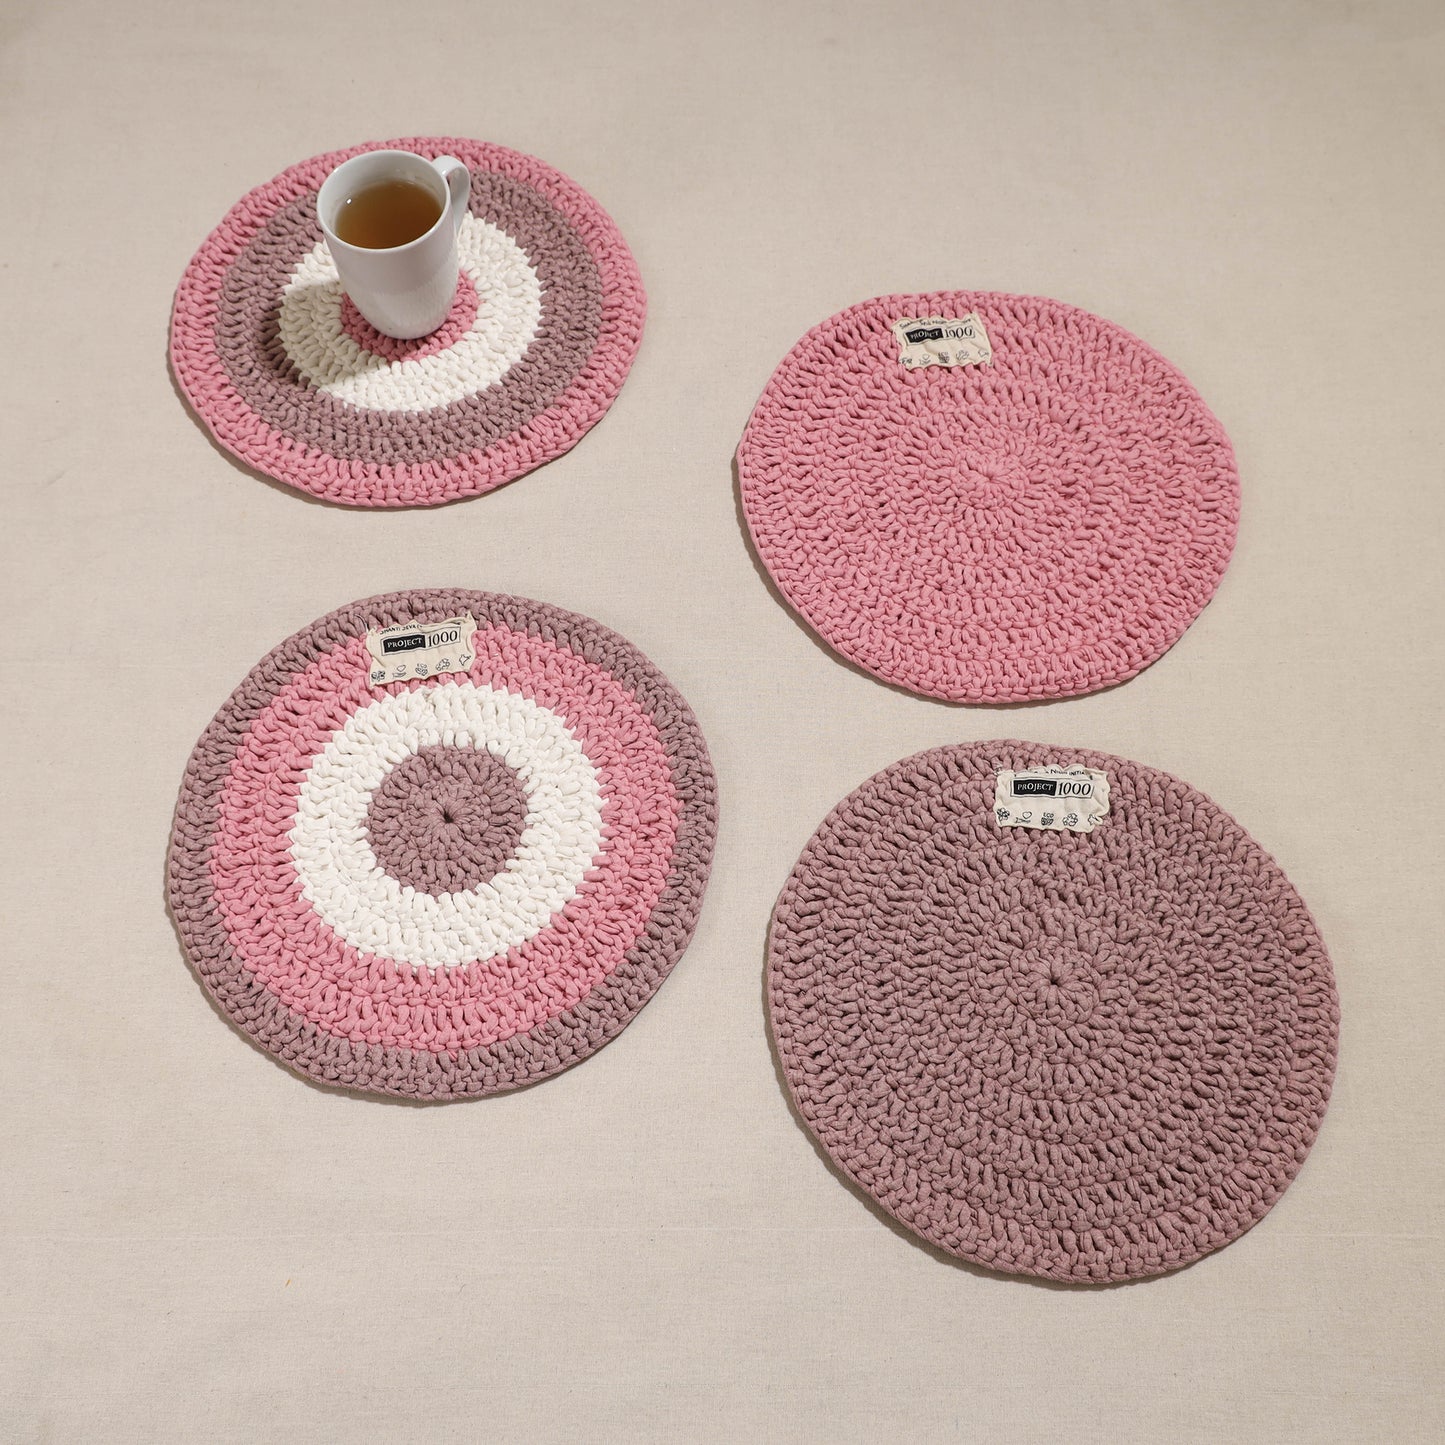 Crochet Work Upcycled Cotton Round Placemat (Set of 4)